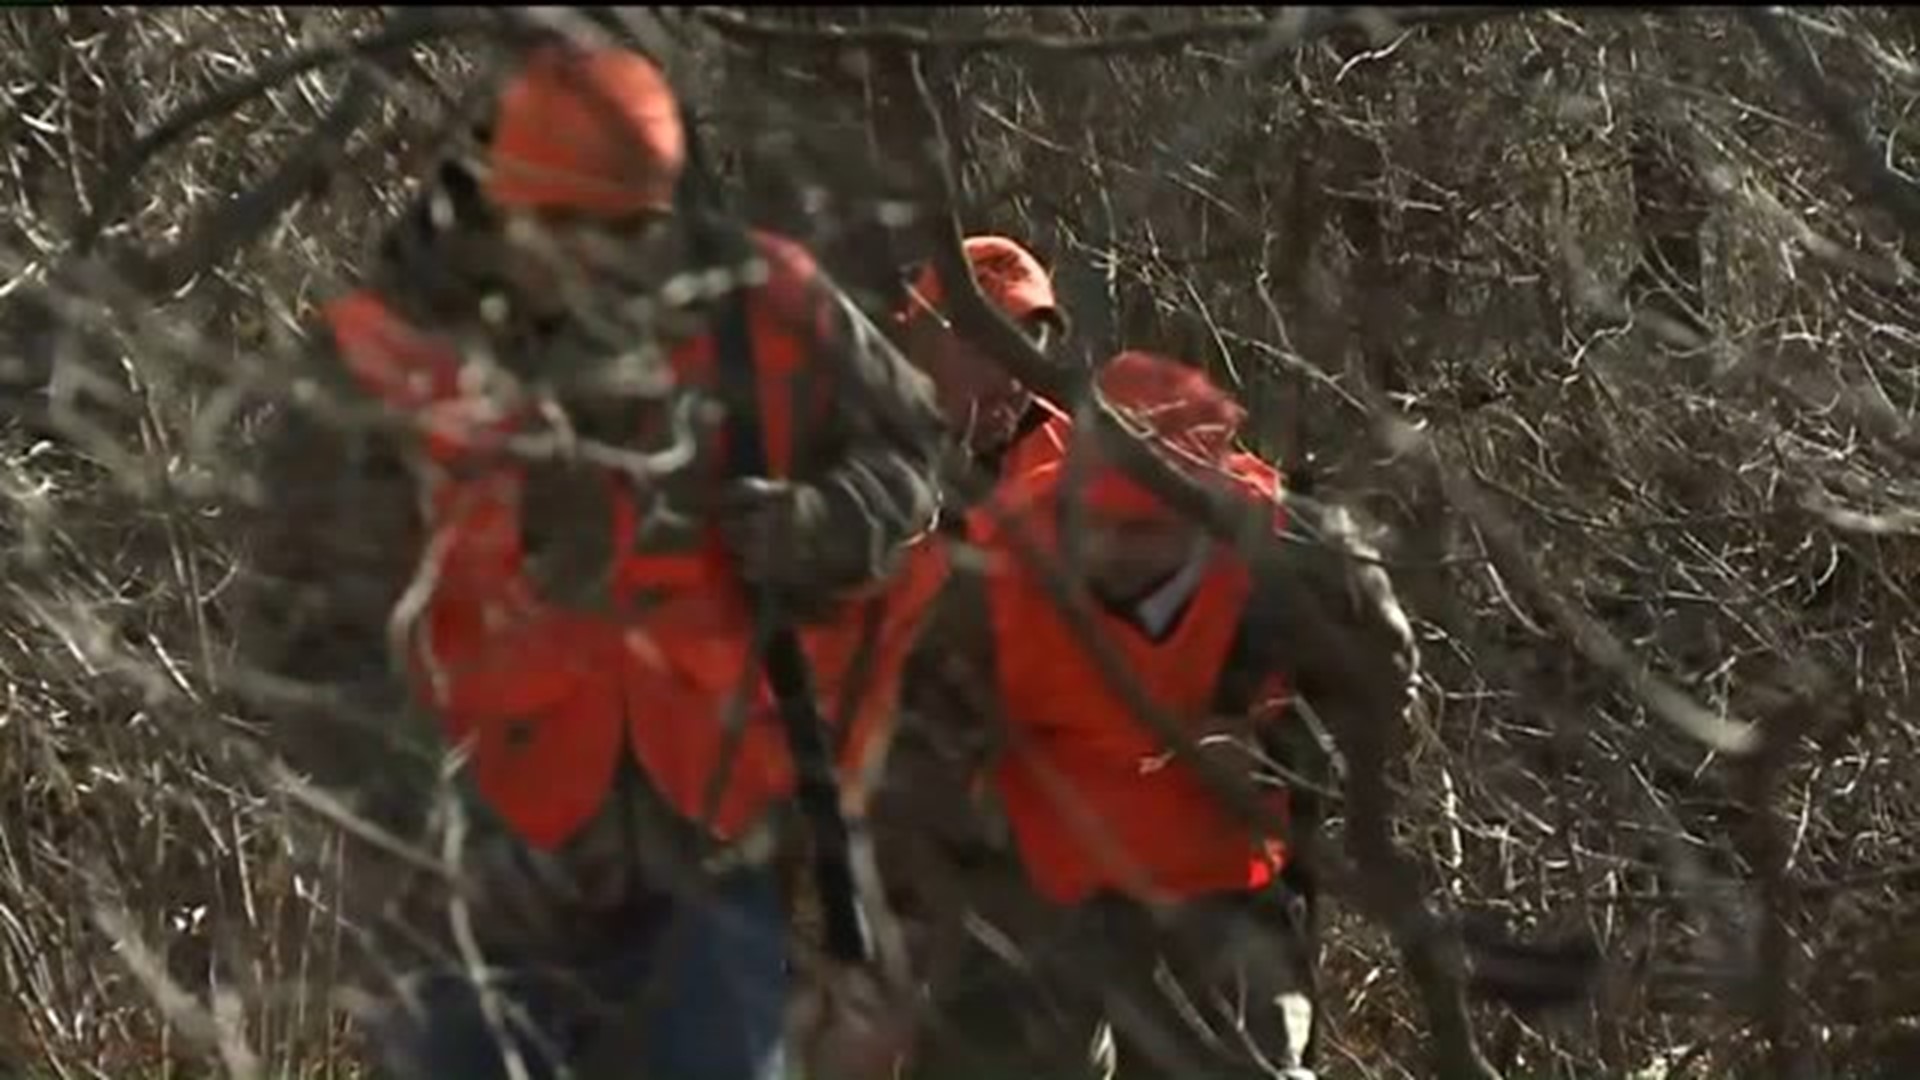 Governor Wolf Signs Bill Allowing Semi-Automatic Weapons for Hunting